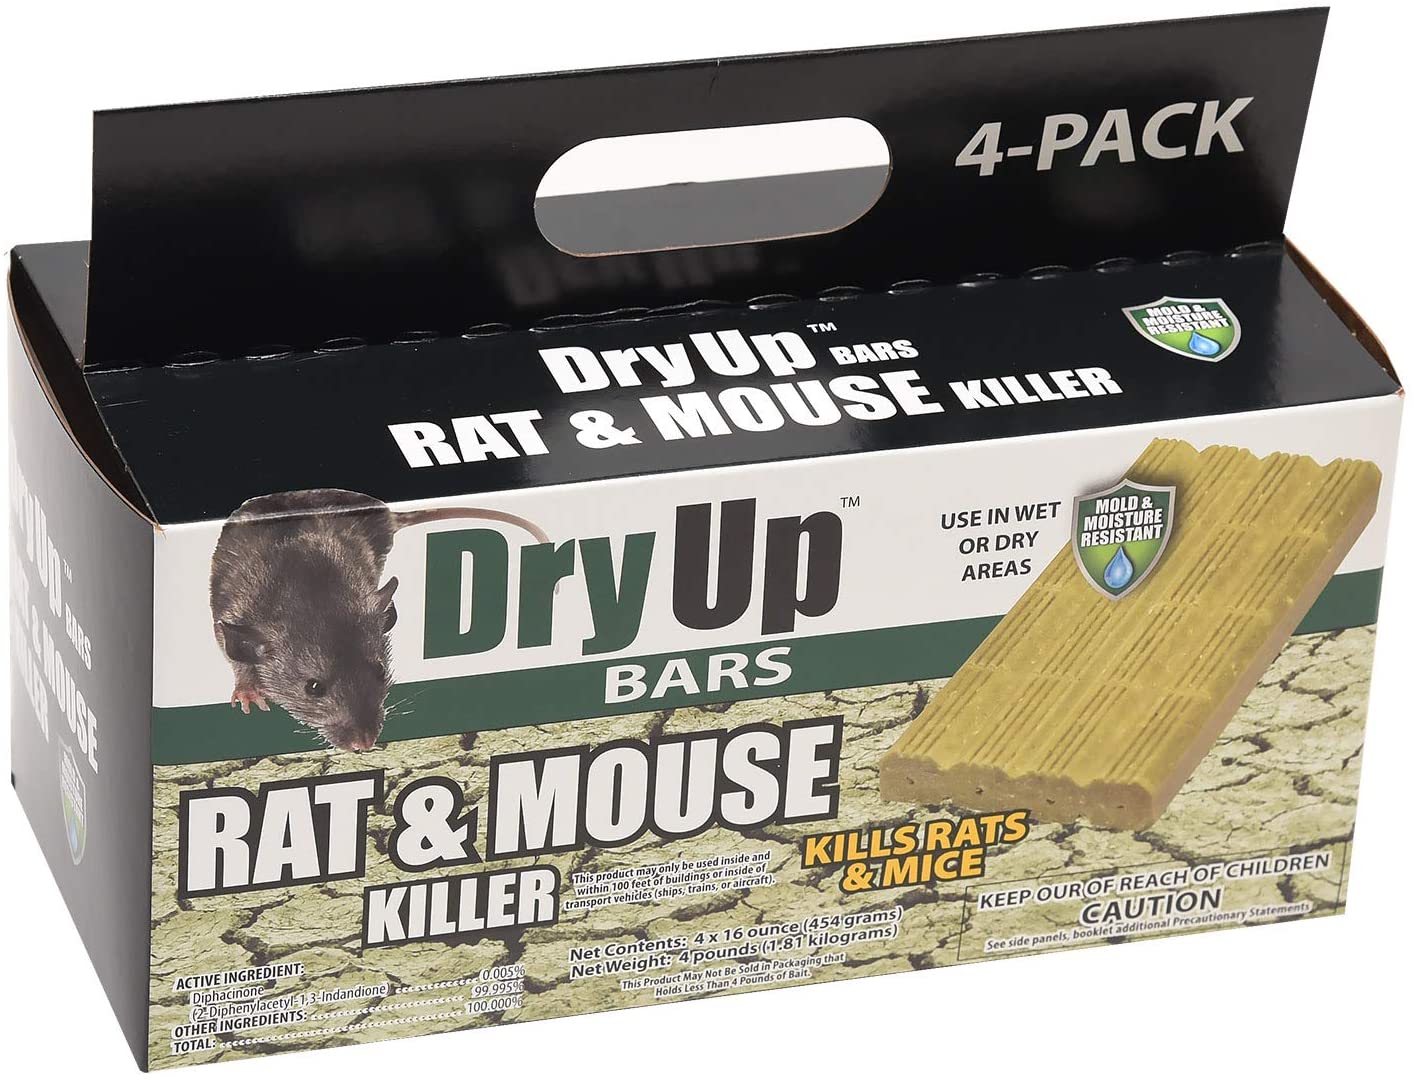 Dry Up, by Harris, is a mouse and rat killer that uses the anticoagulant Diphacinone to kill mice and rats. Each pack includes 4 bars that are each 16oz (1lb) in weight. The bars can be used year round in wet or dry areas, are mold and moisture resistant, and contain an irresistible bait to lure hungry mice and rats.